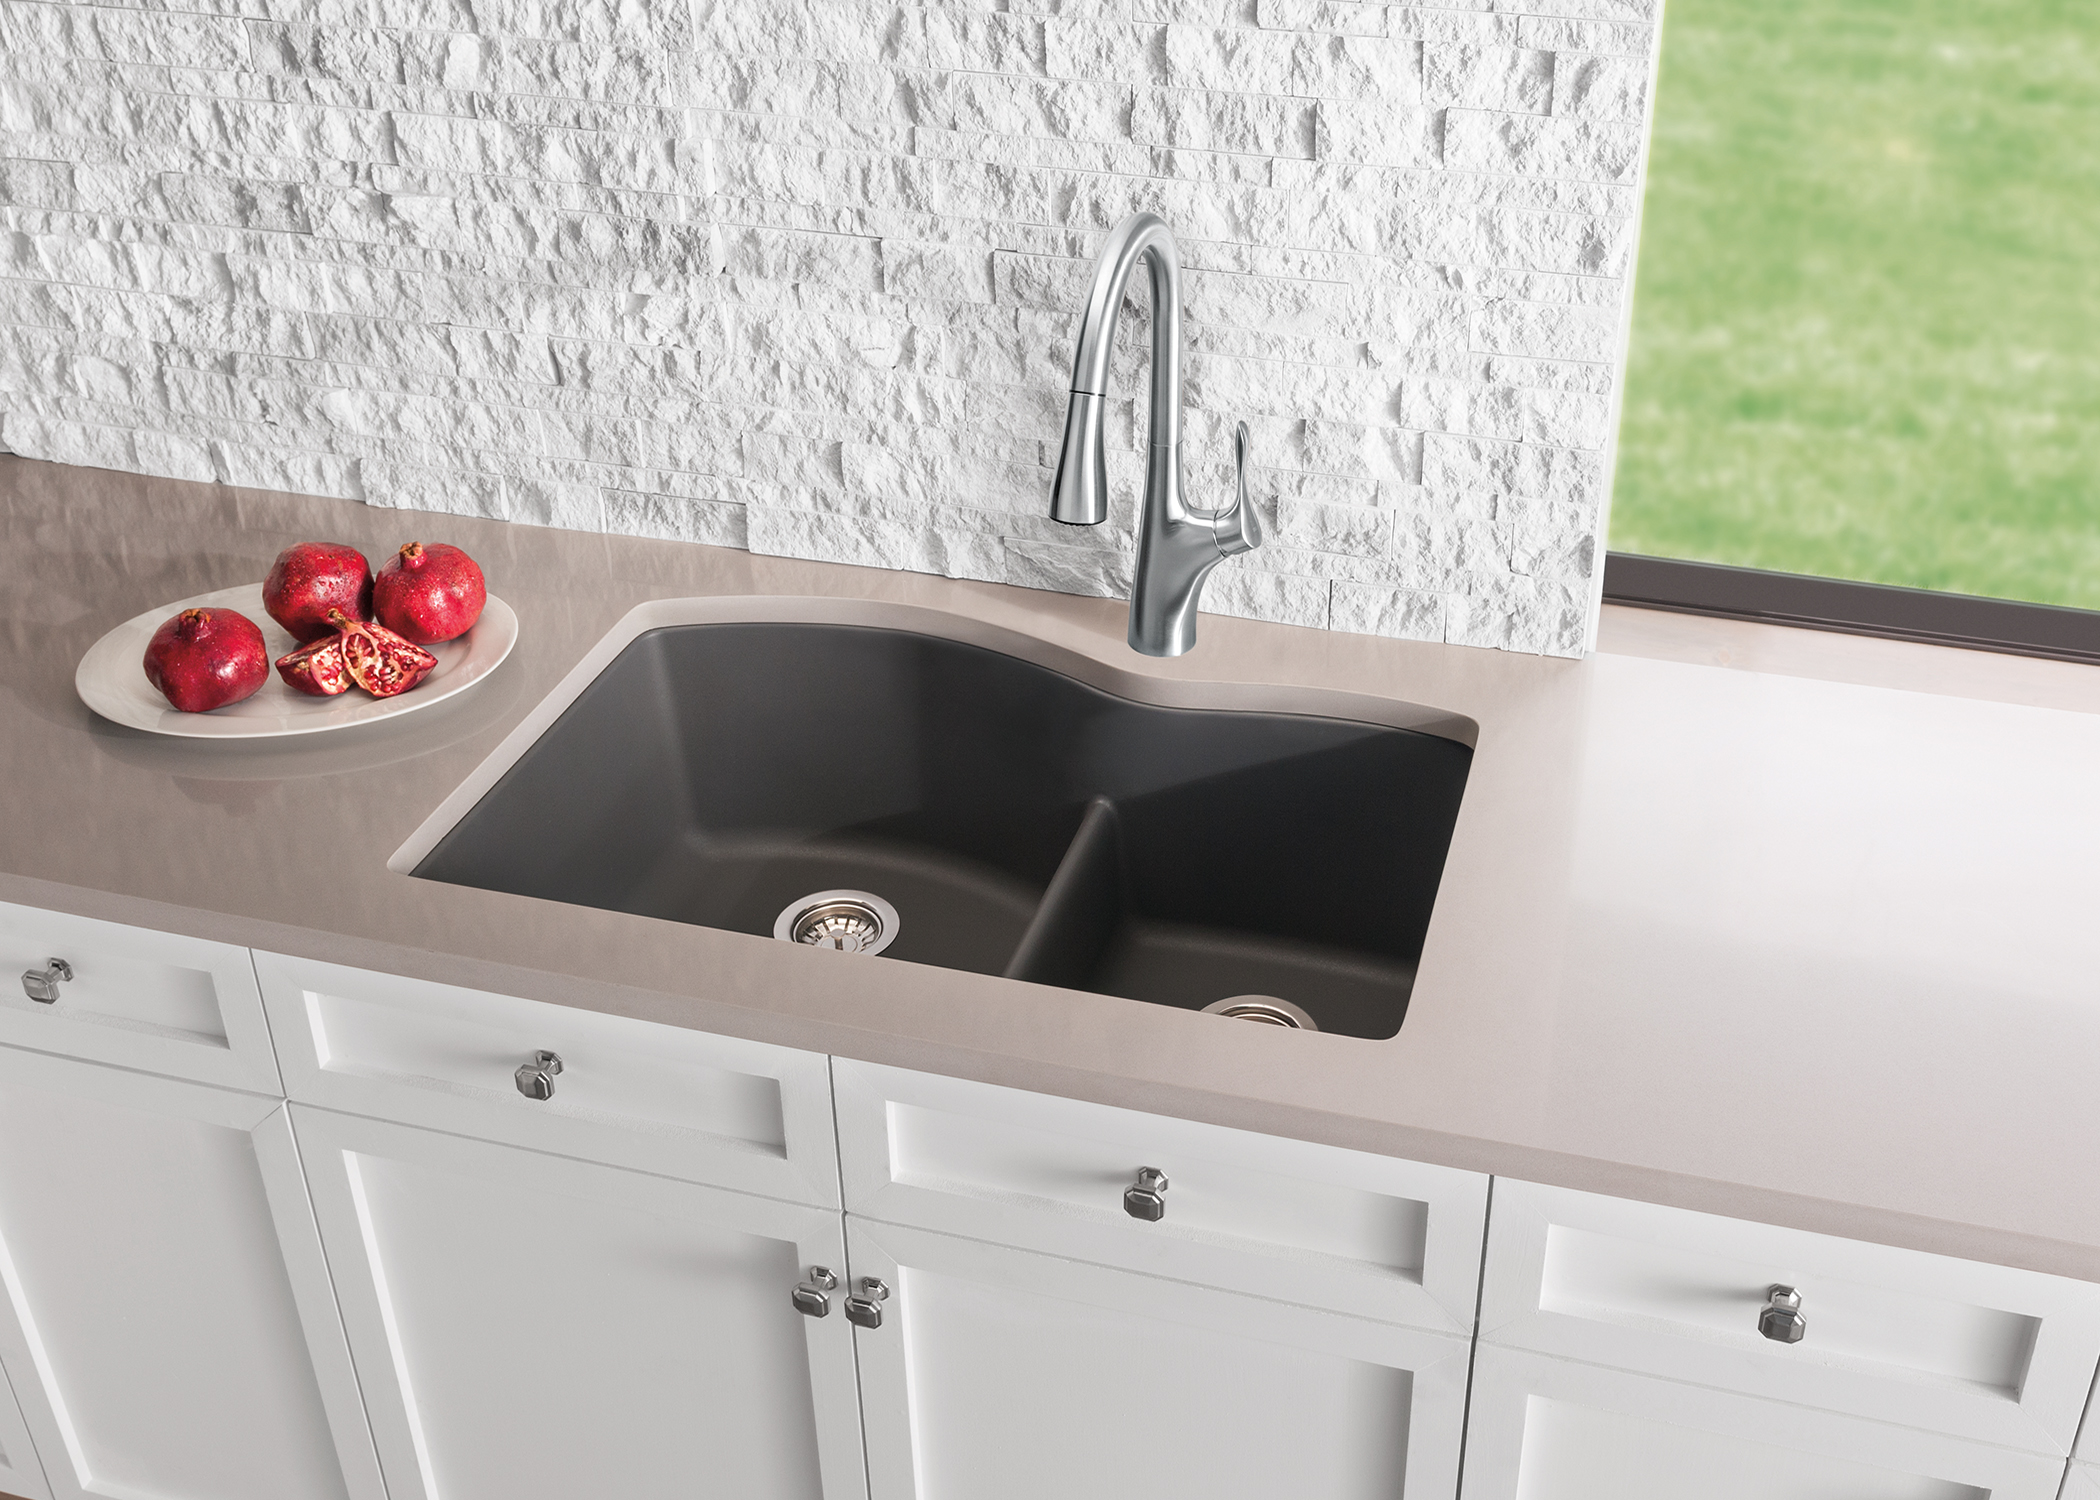 This low divide sink from Blanco has the capacity of a single bowl sink (for large pots and skillets with handles), with a perfect divide that keeps your dirty dishes out of the way while cooking!